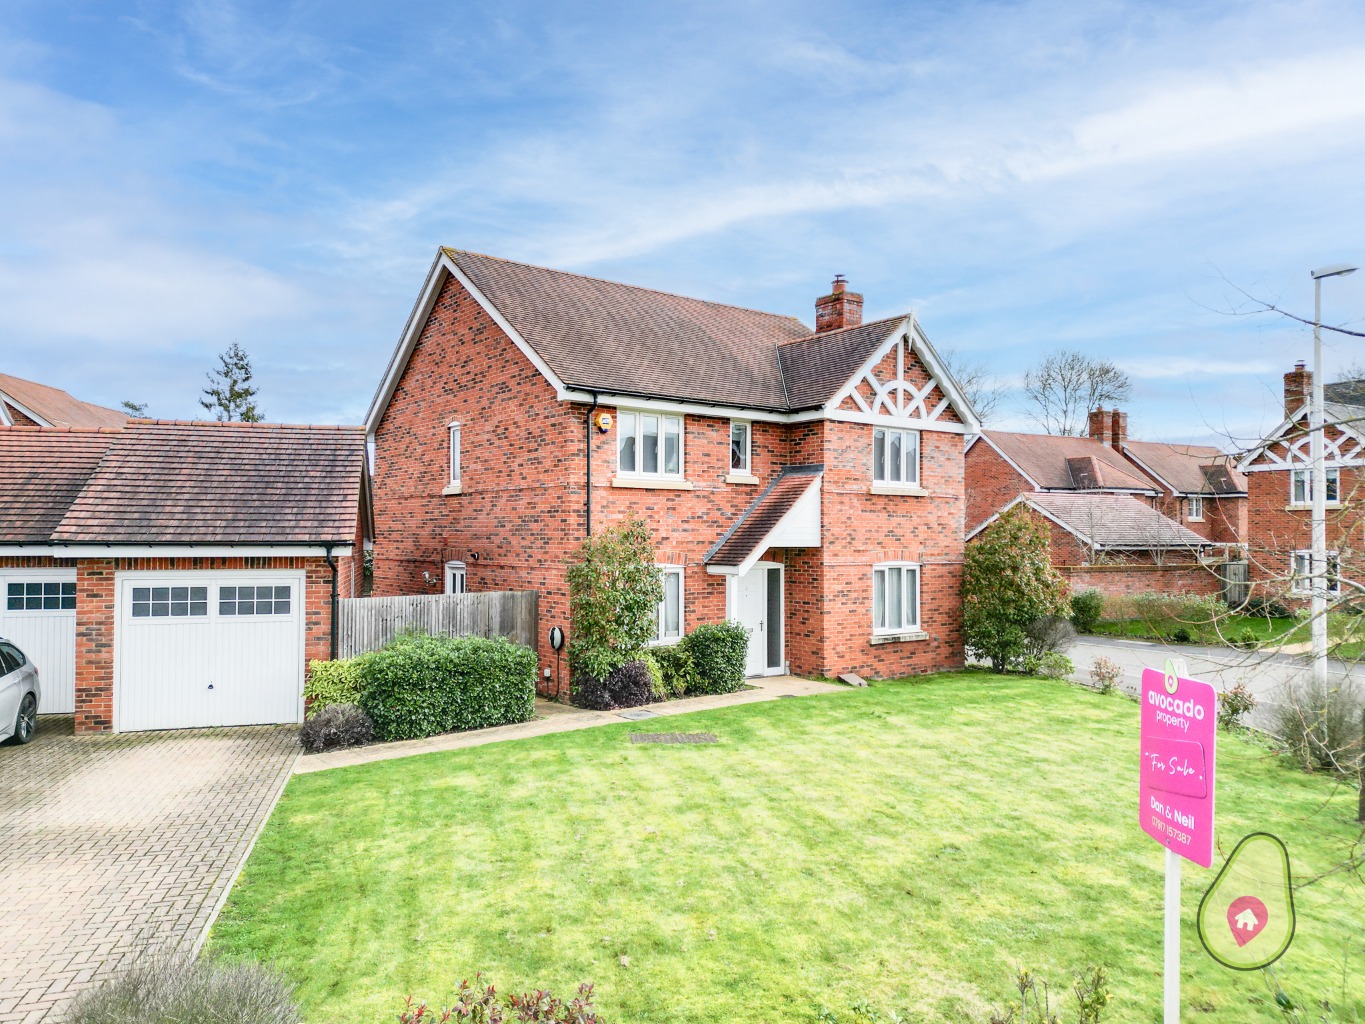 4 bed detached house for sale in The Pippins, Reading - Property Image 1